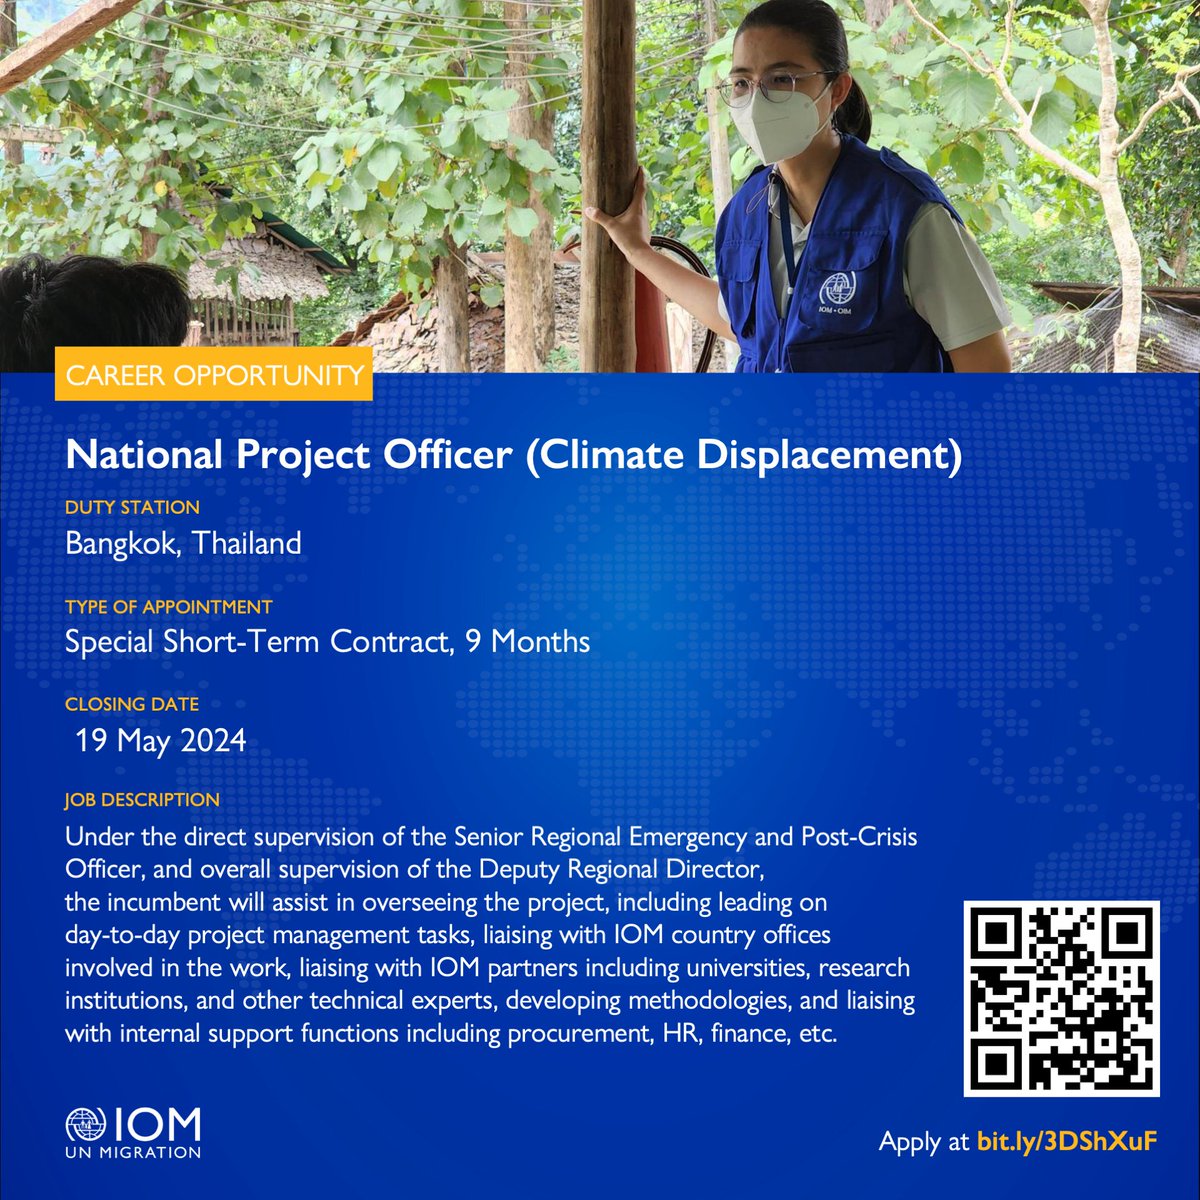 📢 New opportunities await at IOM! If you are someone looking to promote ethical recruitment & responsible employment for migrant workers, then this position is for you. Apply today to join our migration, business and human rights team in Bangkok 🇹🇭. 👉🏼 thailand.iom.int/careers